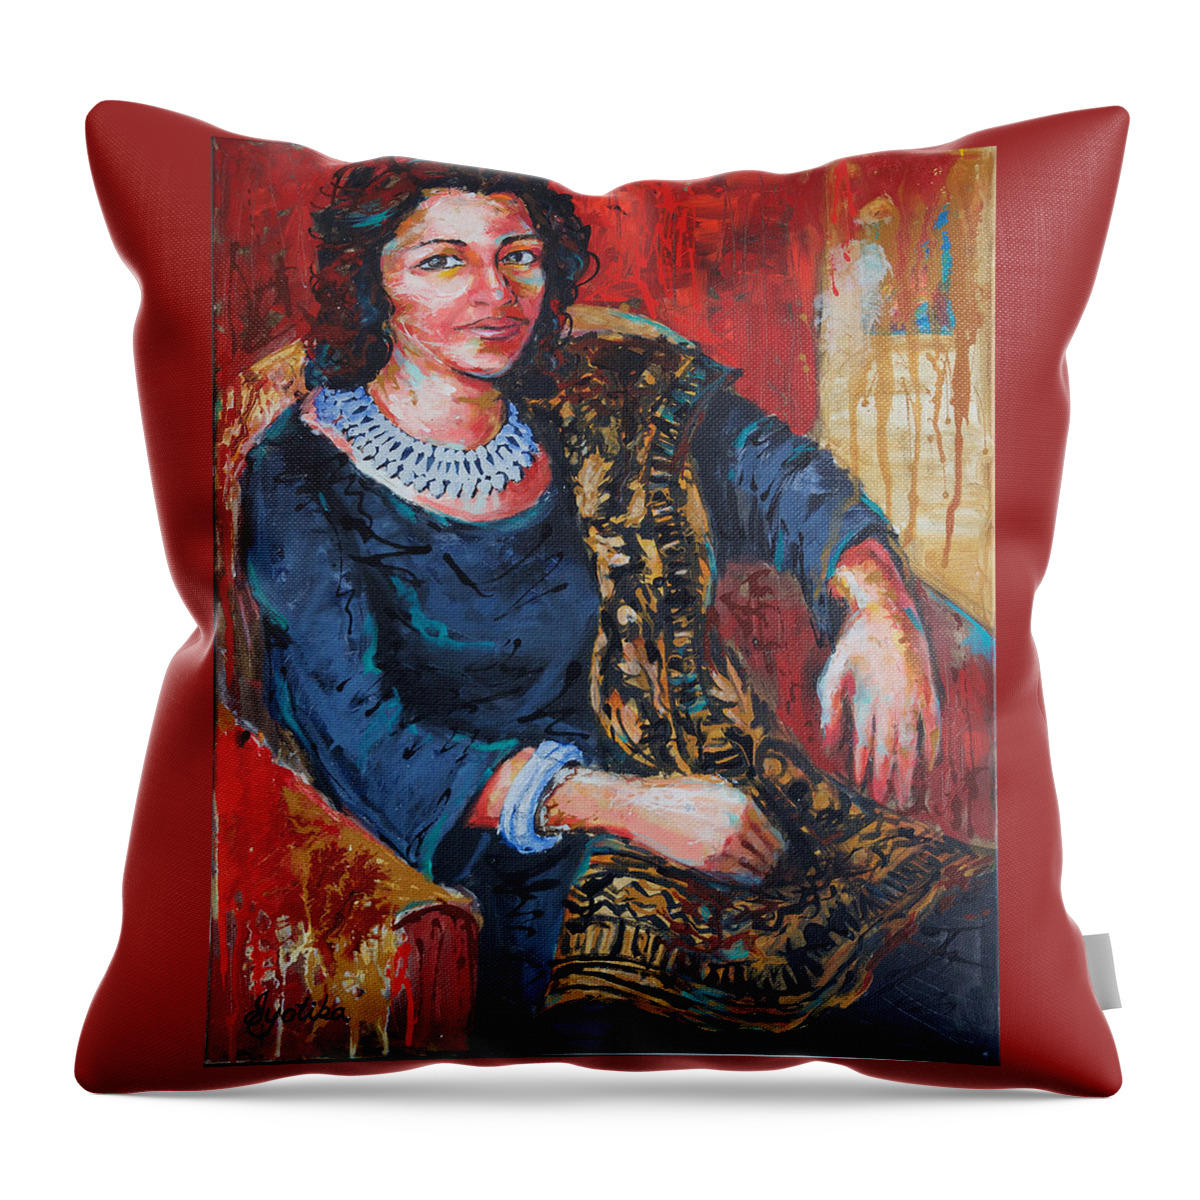 Original Painting Throw Pillow featuring the painting Intrigue by Jyotika Shroff